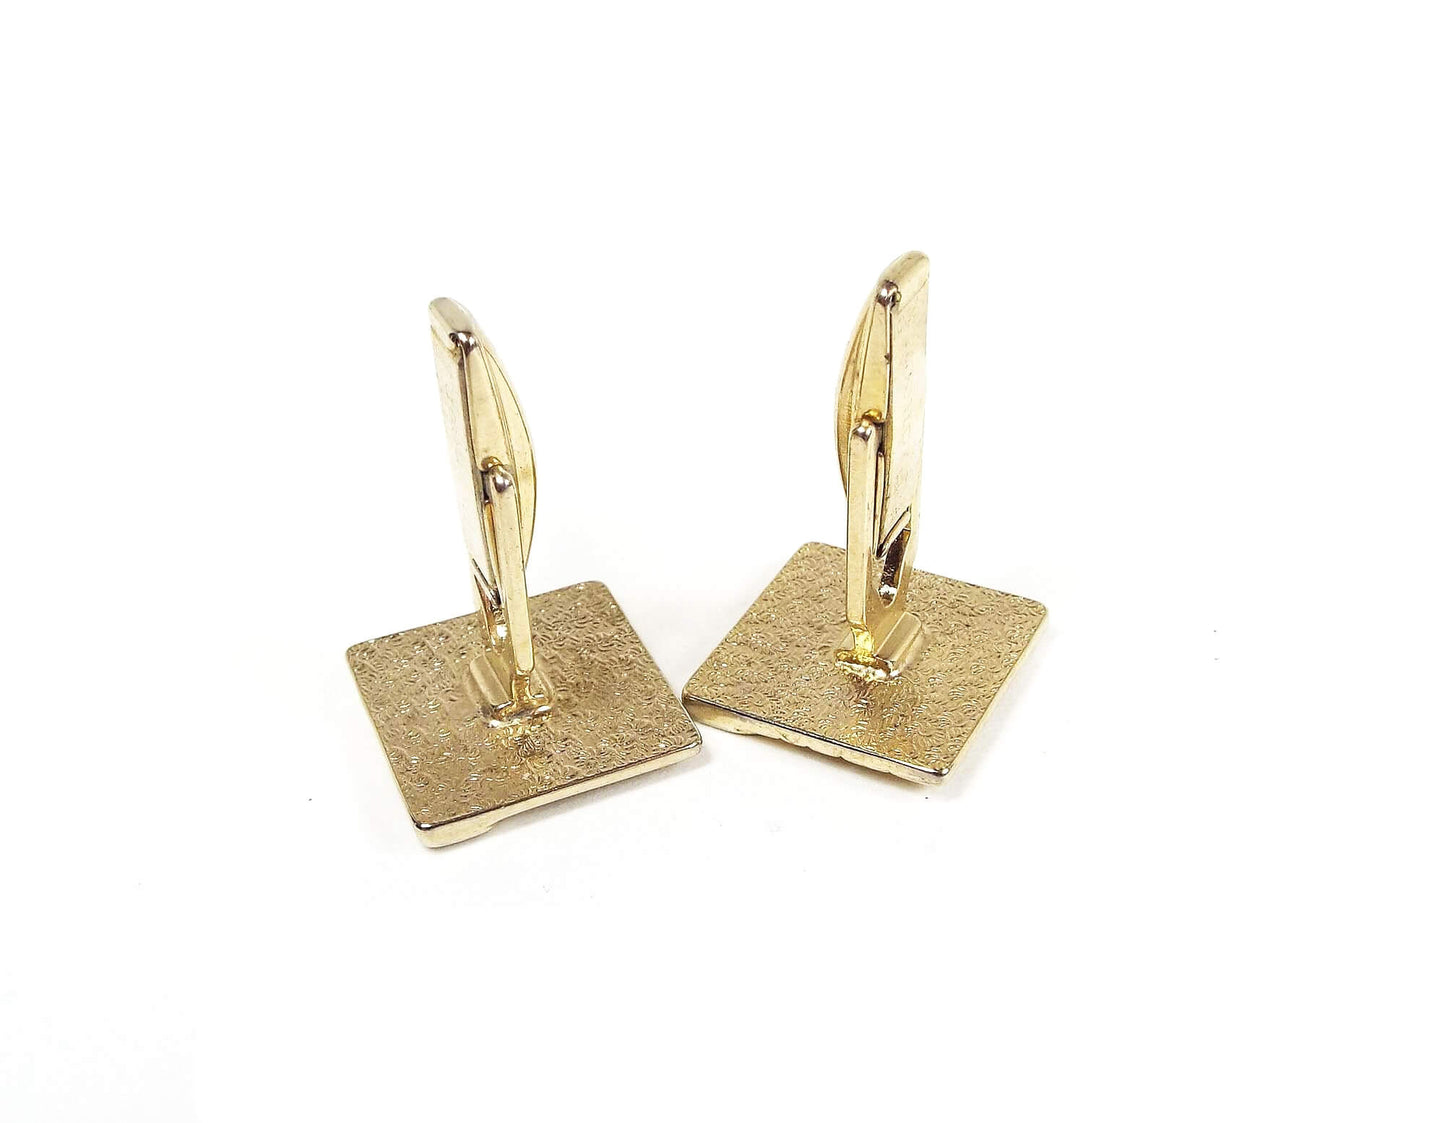 Pioneer Matte and Shiny Gold Tone Vintage Cufflinks, Square Cuff Links